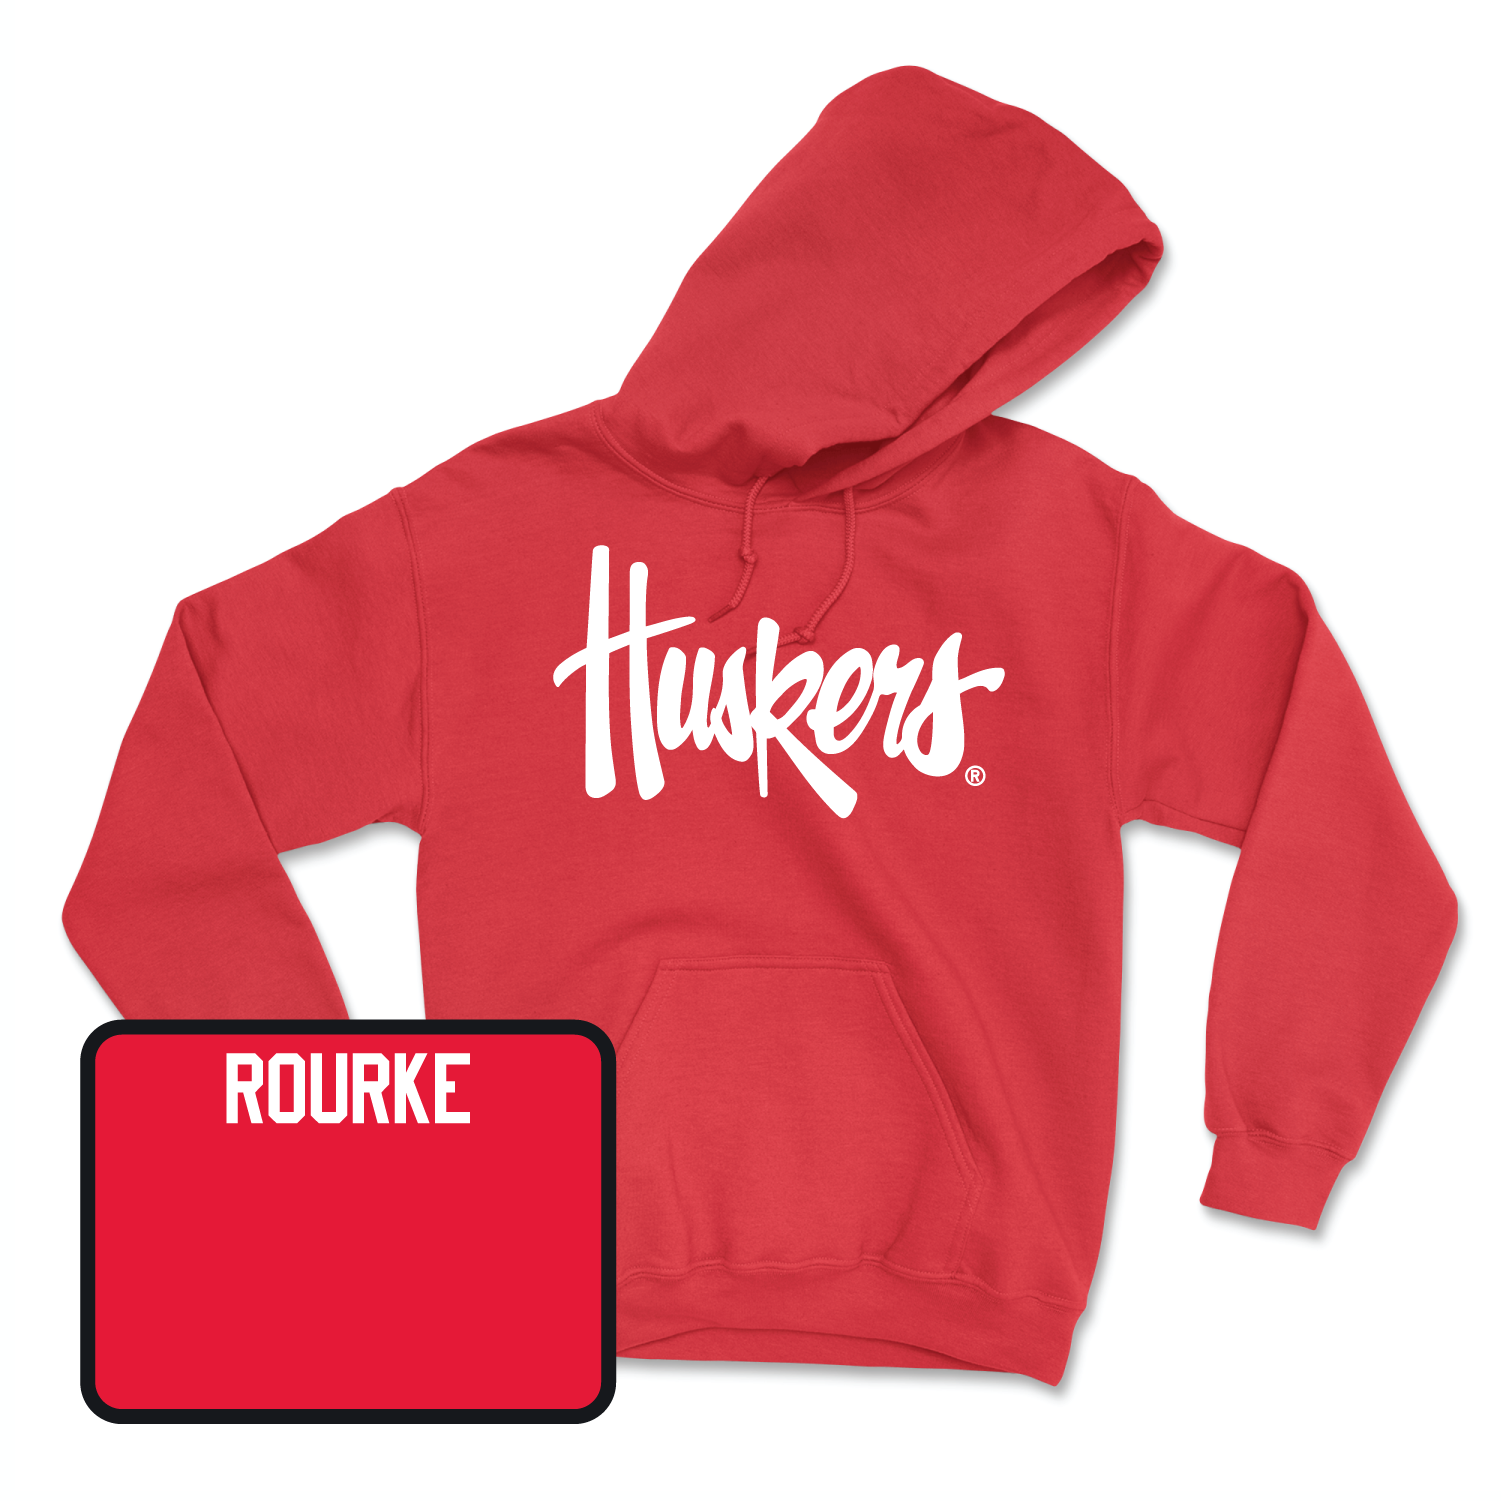 Red Women's Gymnastics Huskers Hoodie Youth Large / Halle Rourke